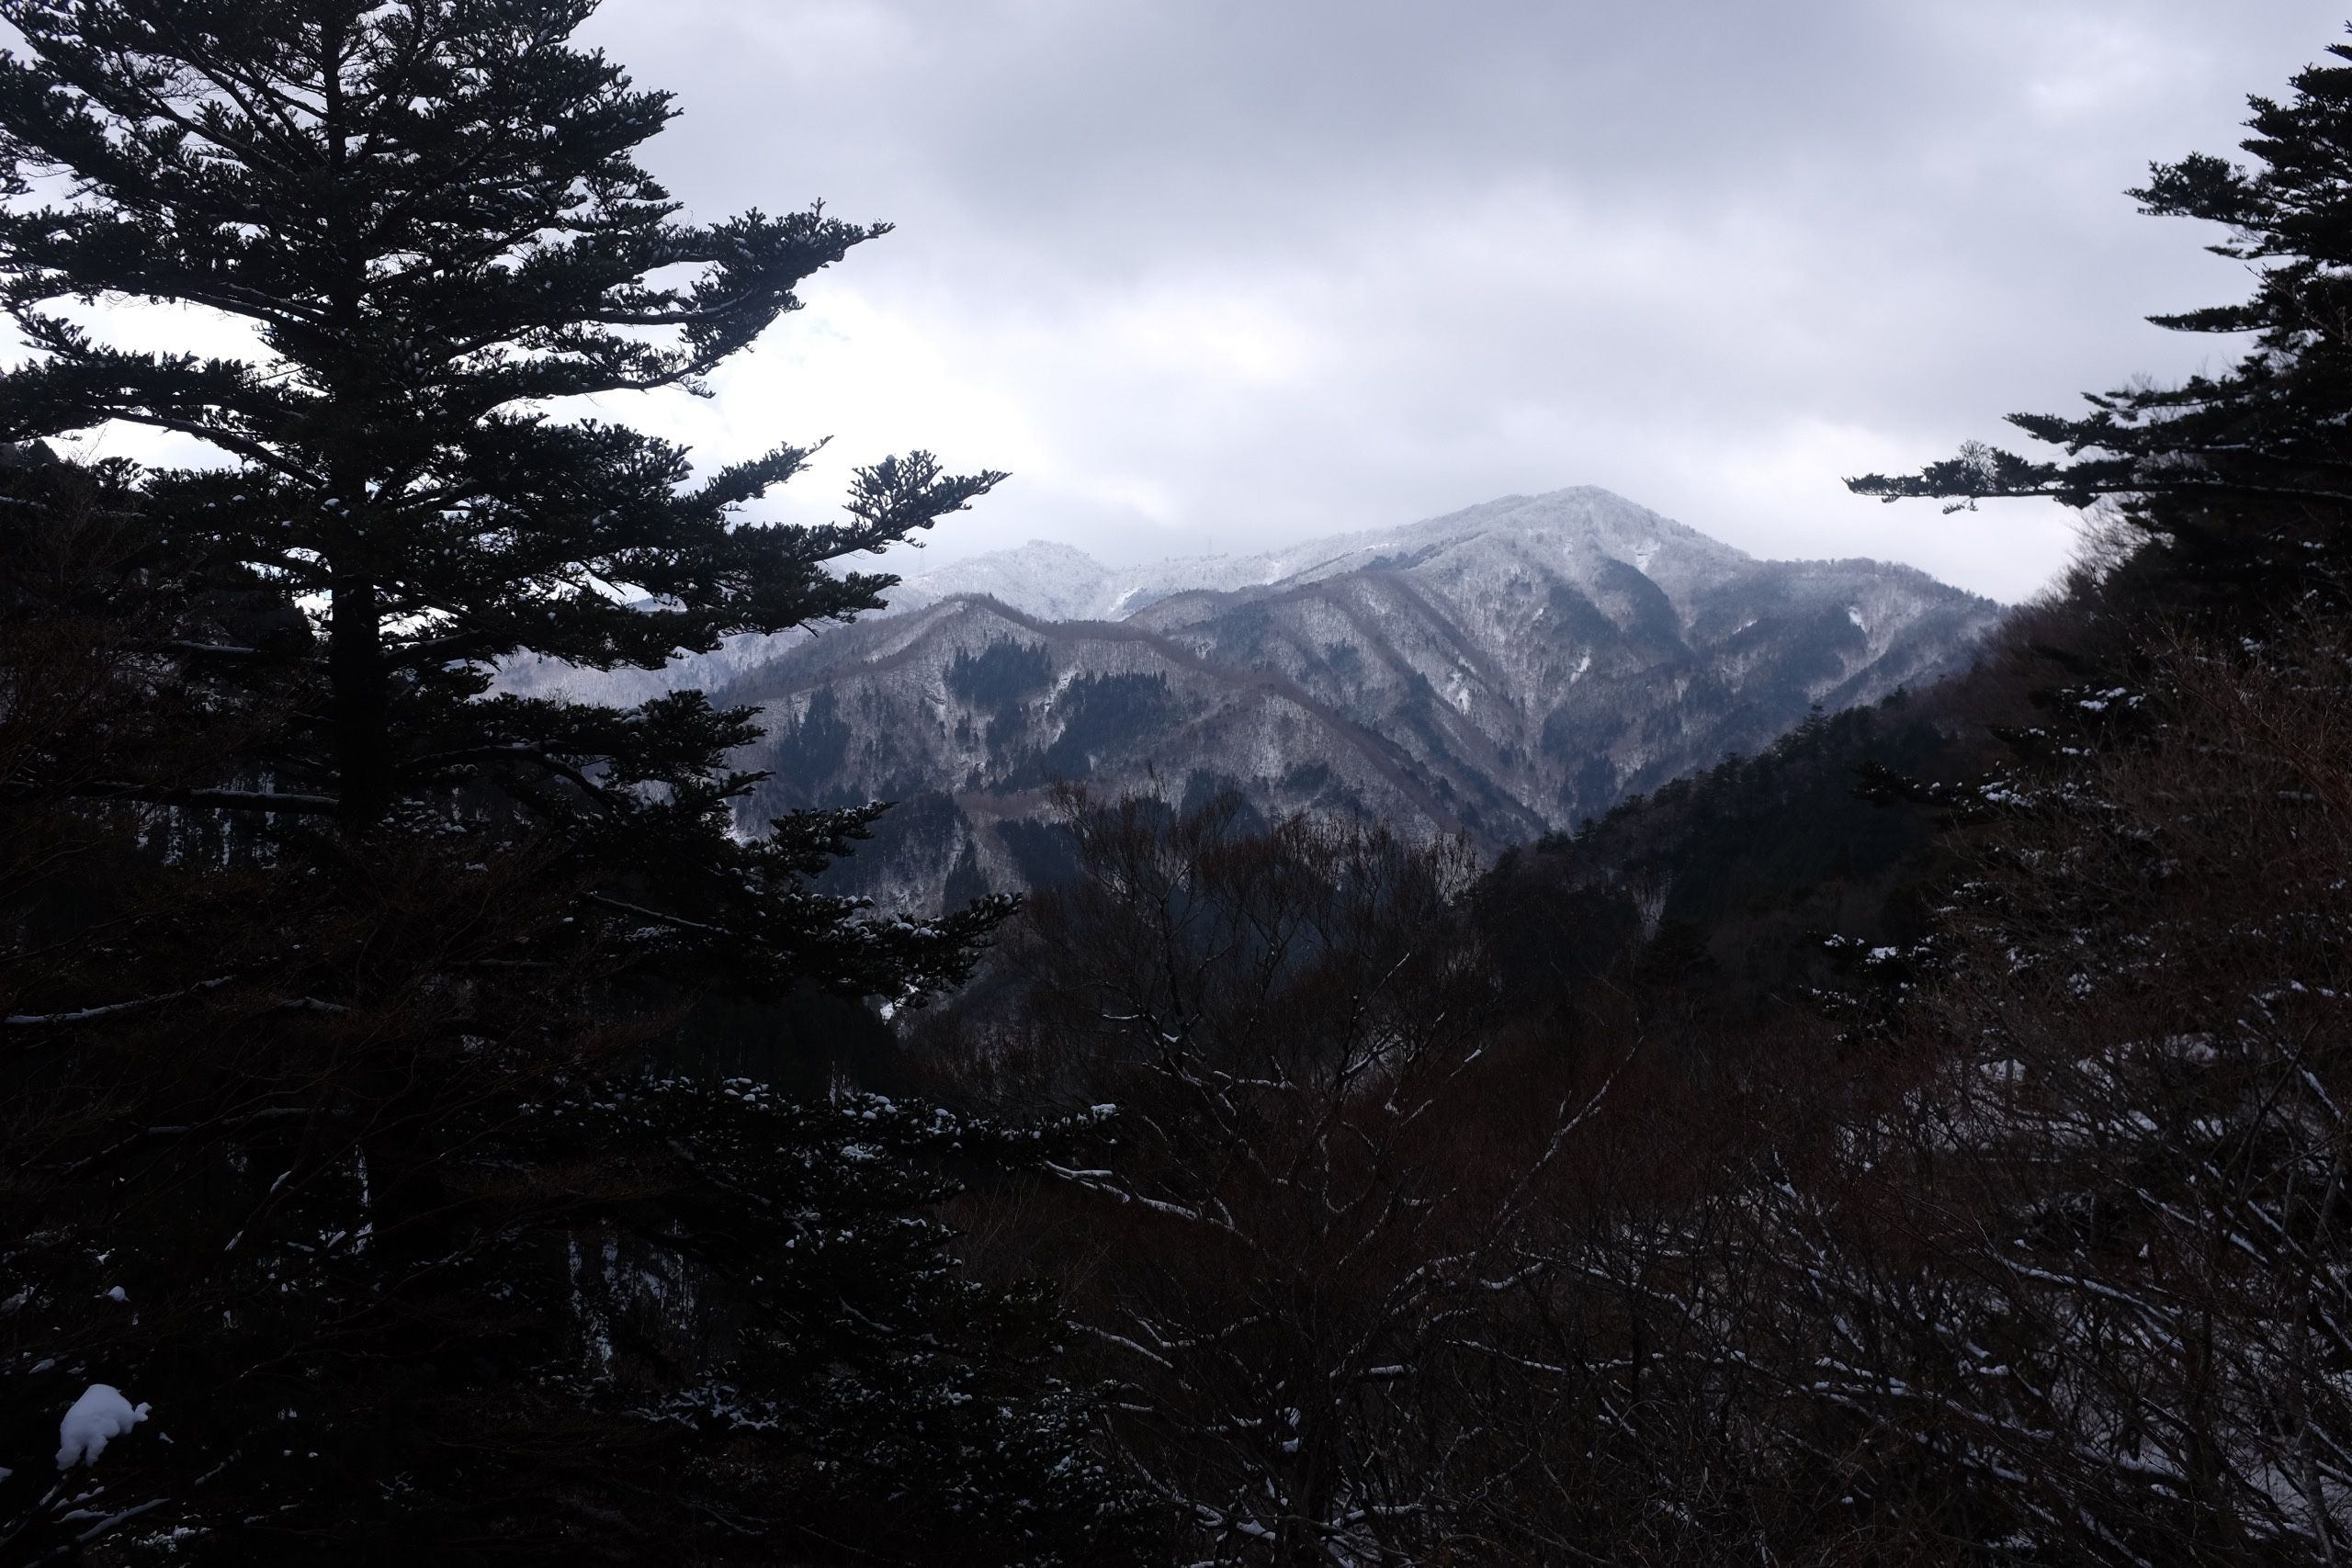 Panorama of a winter mountain scenery, with a tall, forested and snow-covered mountain on the horizon.